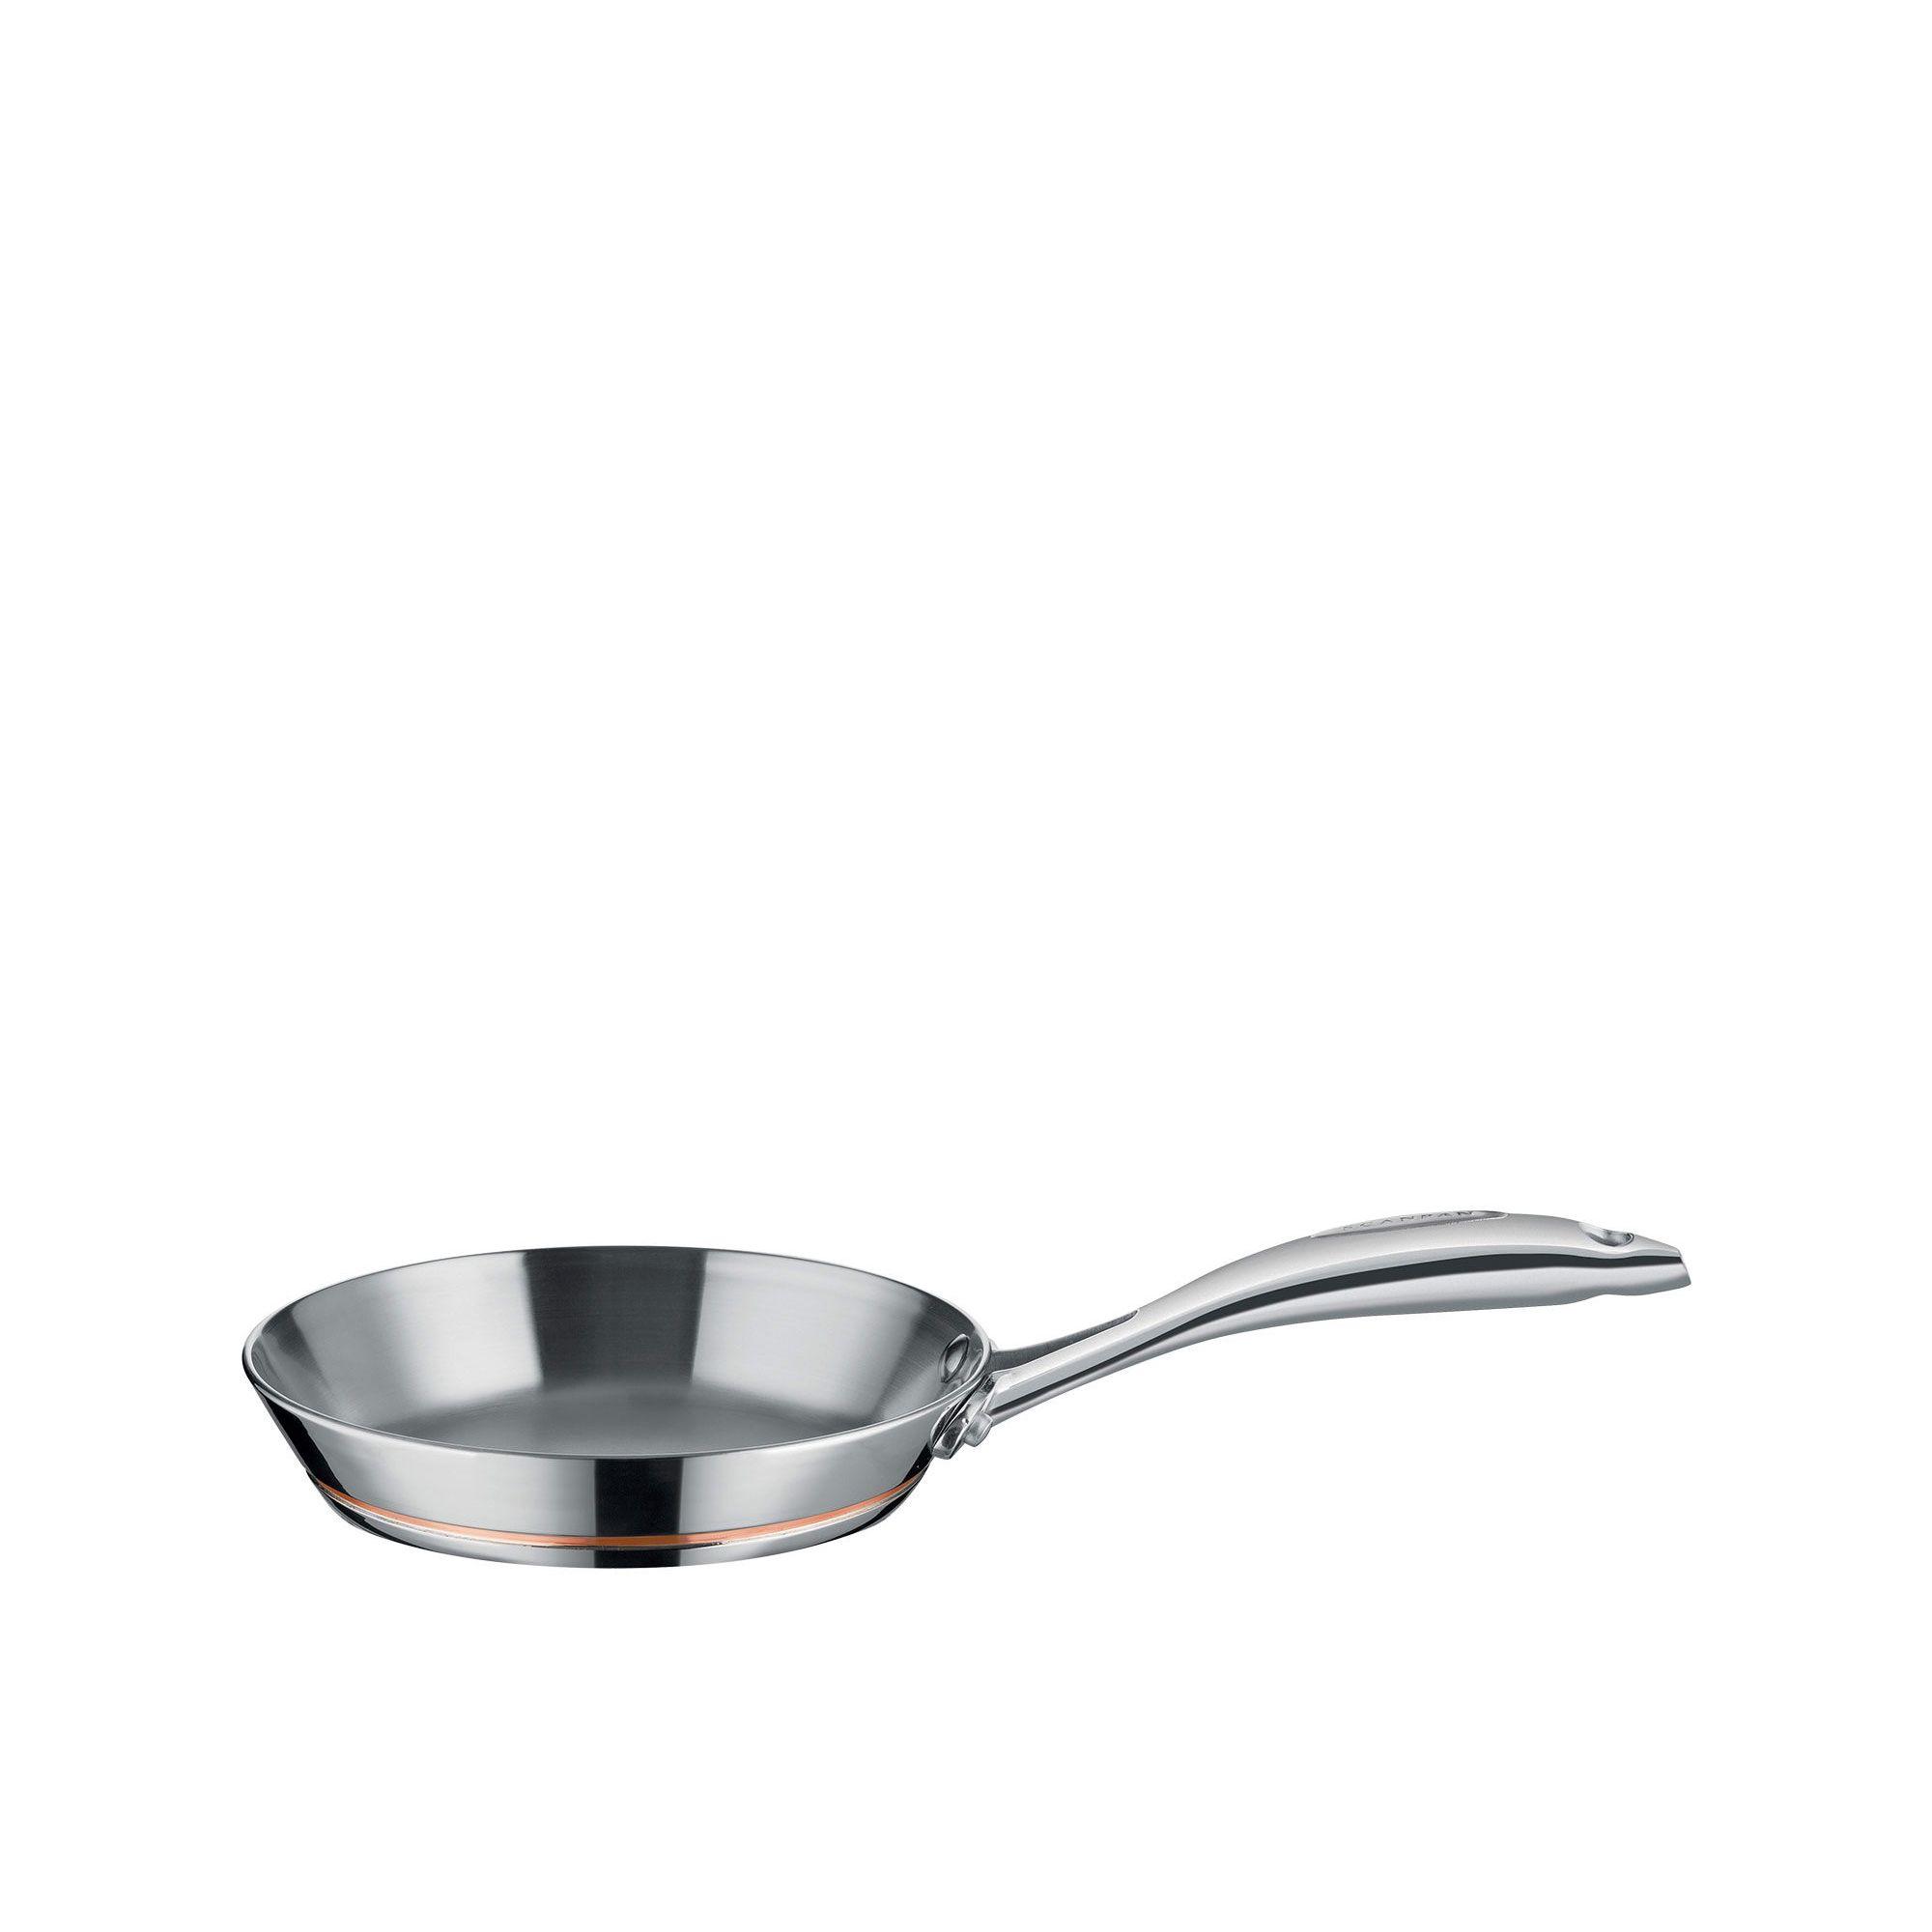 Scanpan Axis Stainless Steel Frypan 20cm Image 1